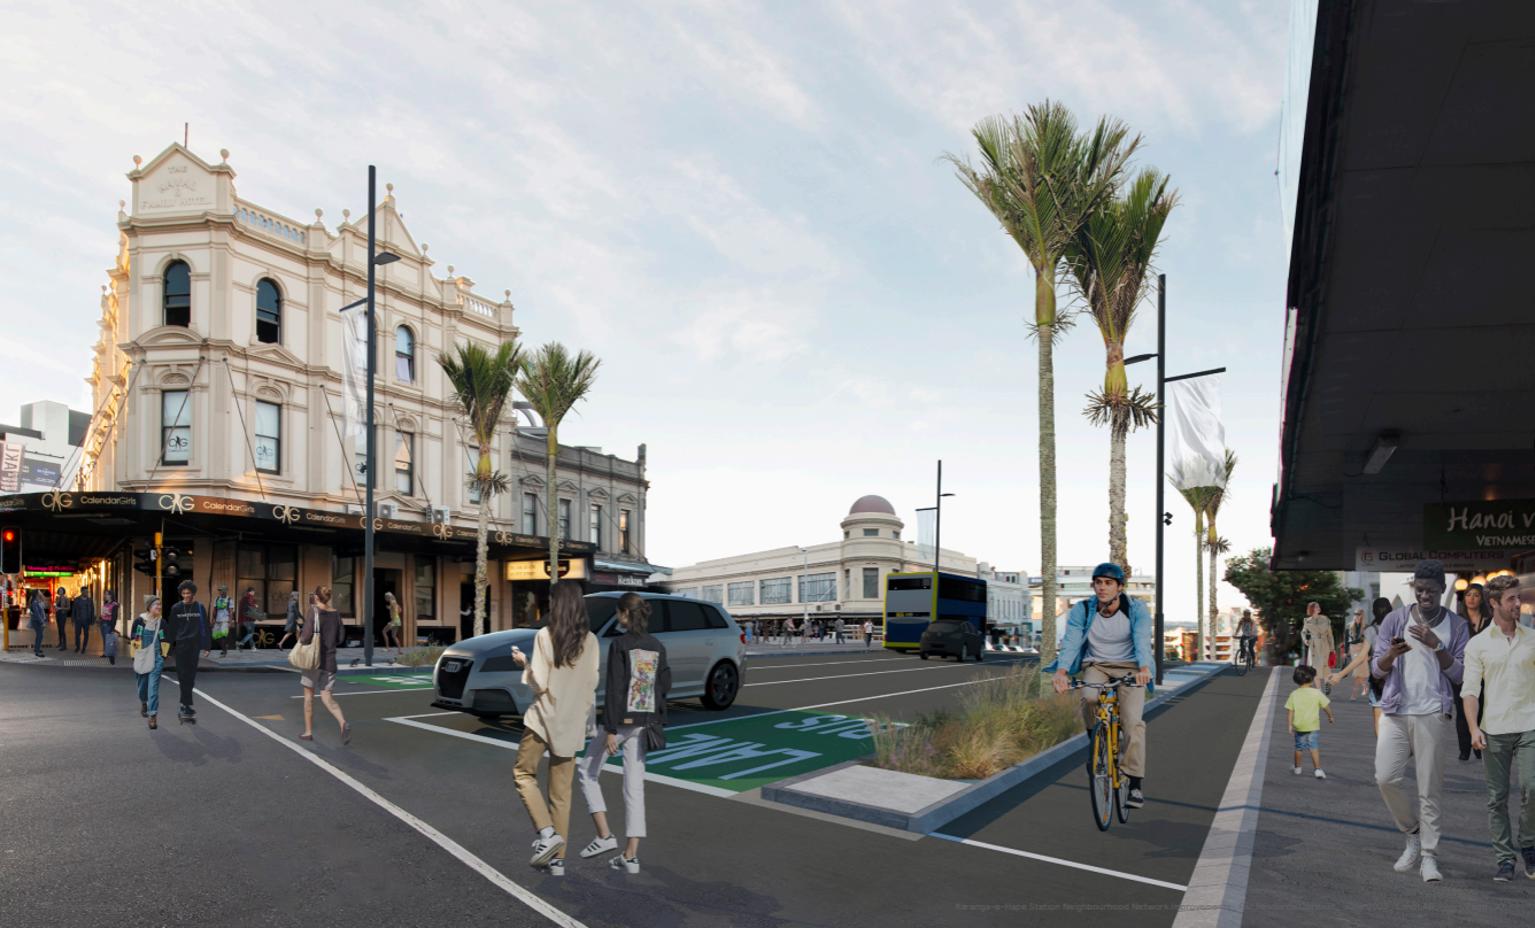 Artists impression of the completed project. People crossing the road, walking down the street and biking along the bike lane.